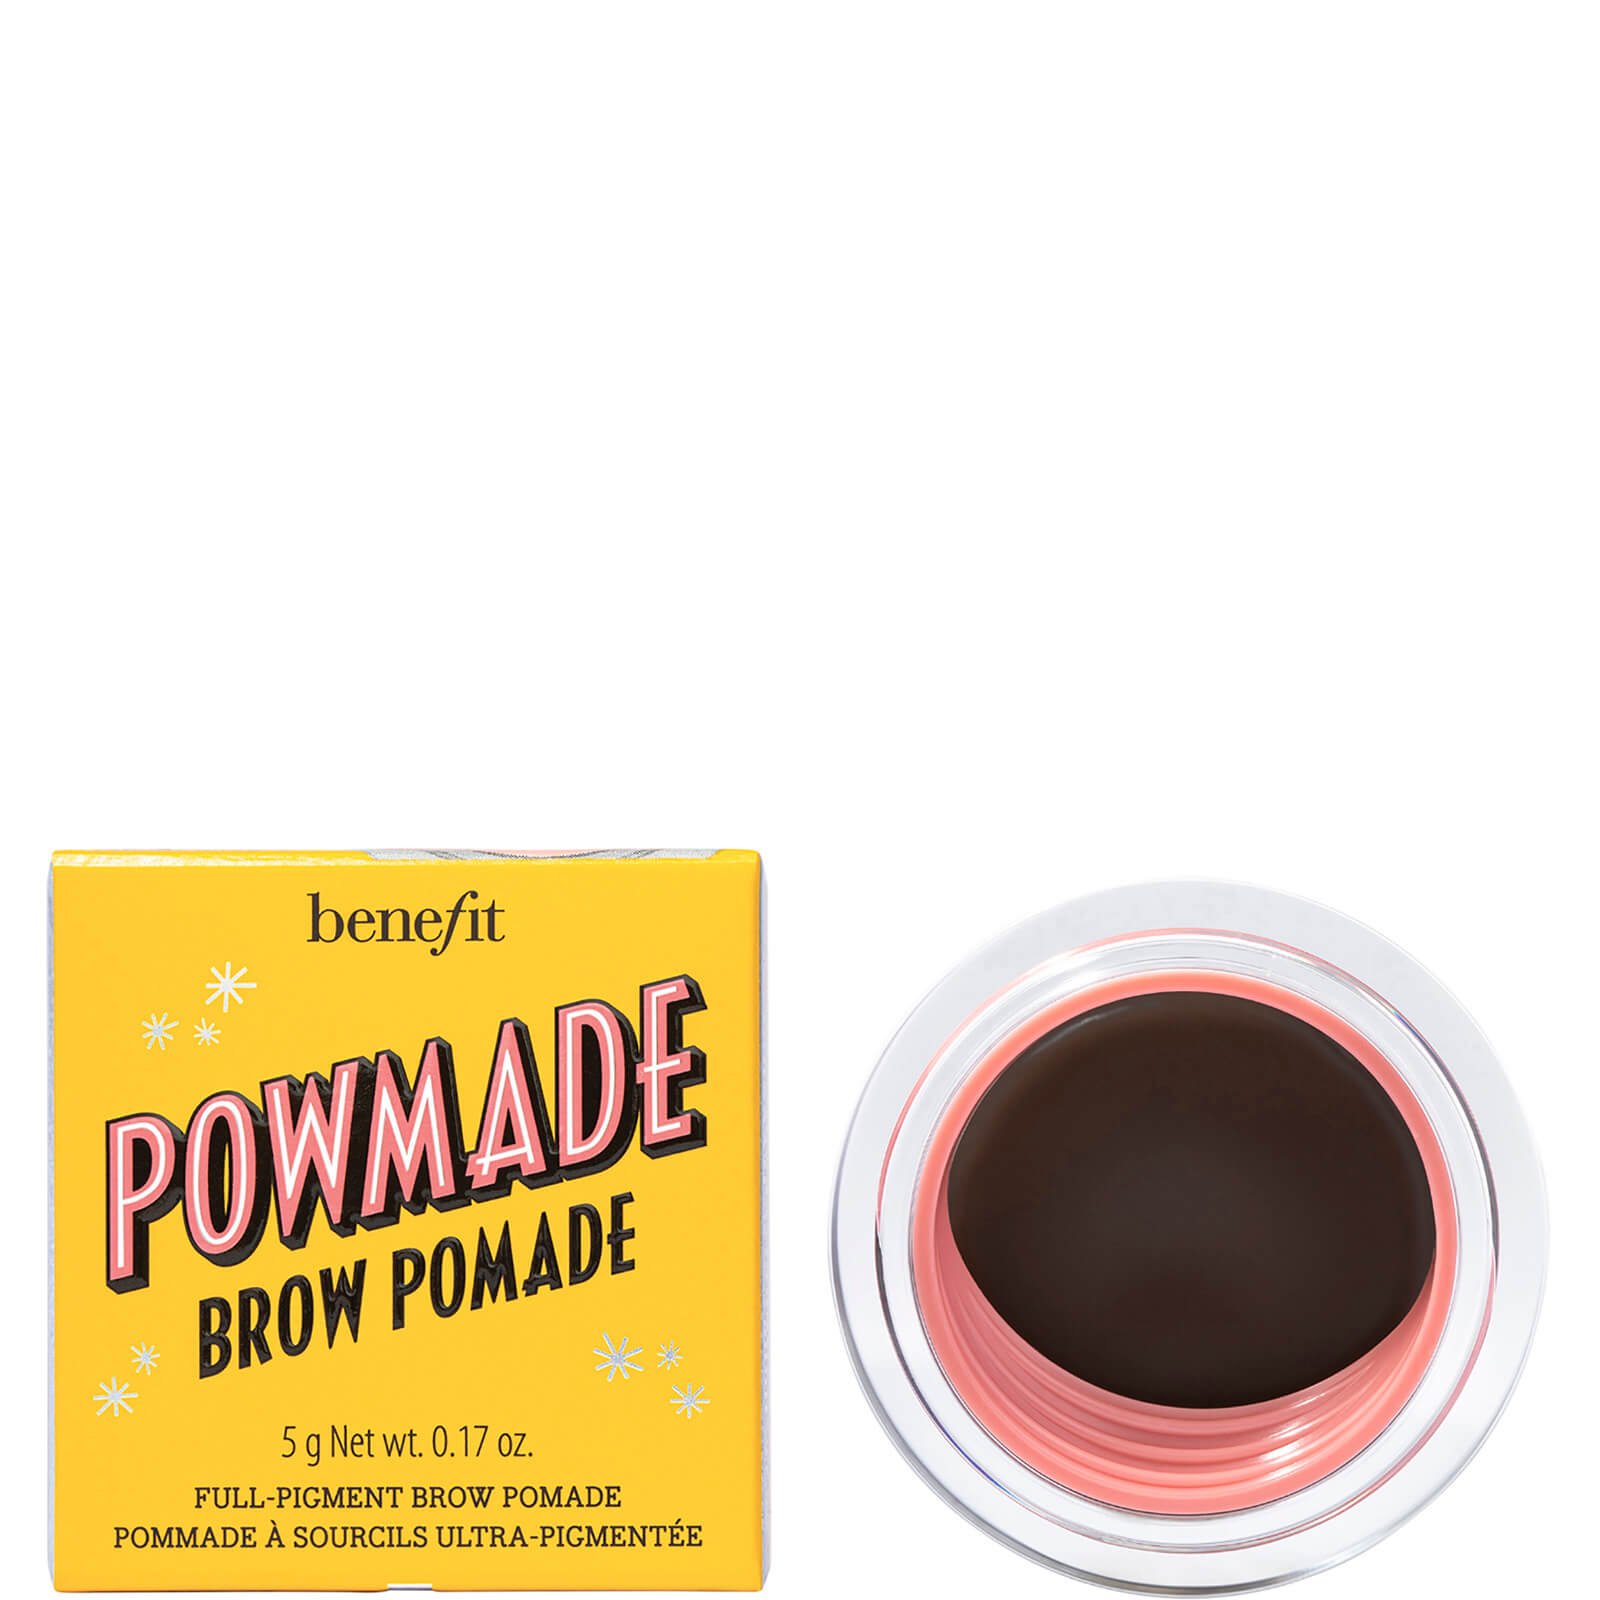 benefit Powmade Full Pigment Eyebrow Pomade 5g (Various Shades) - 4 Warm Deep Brown